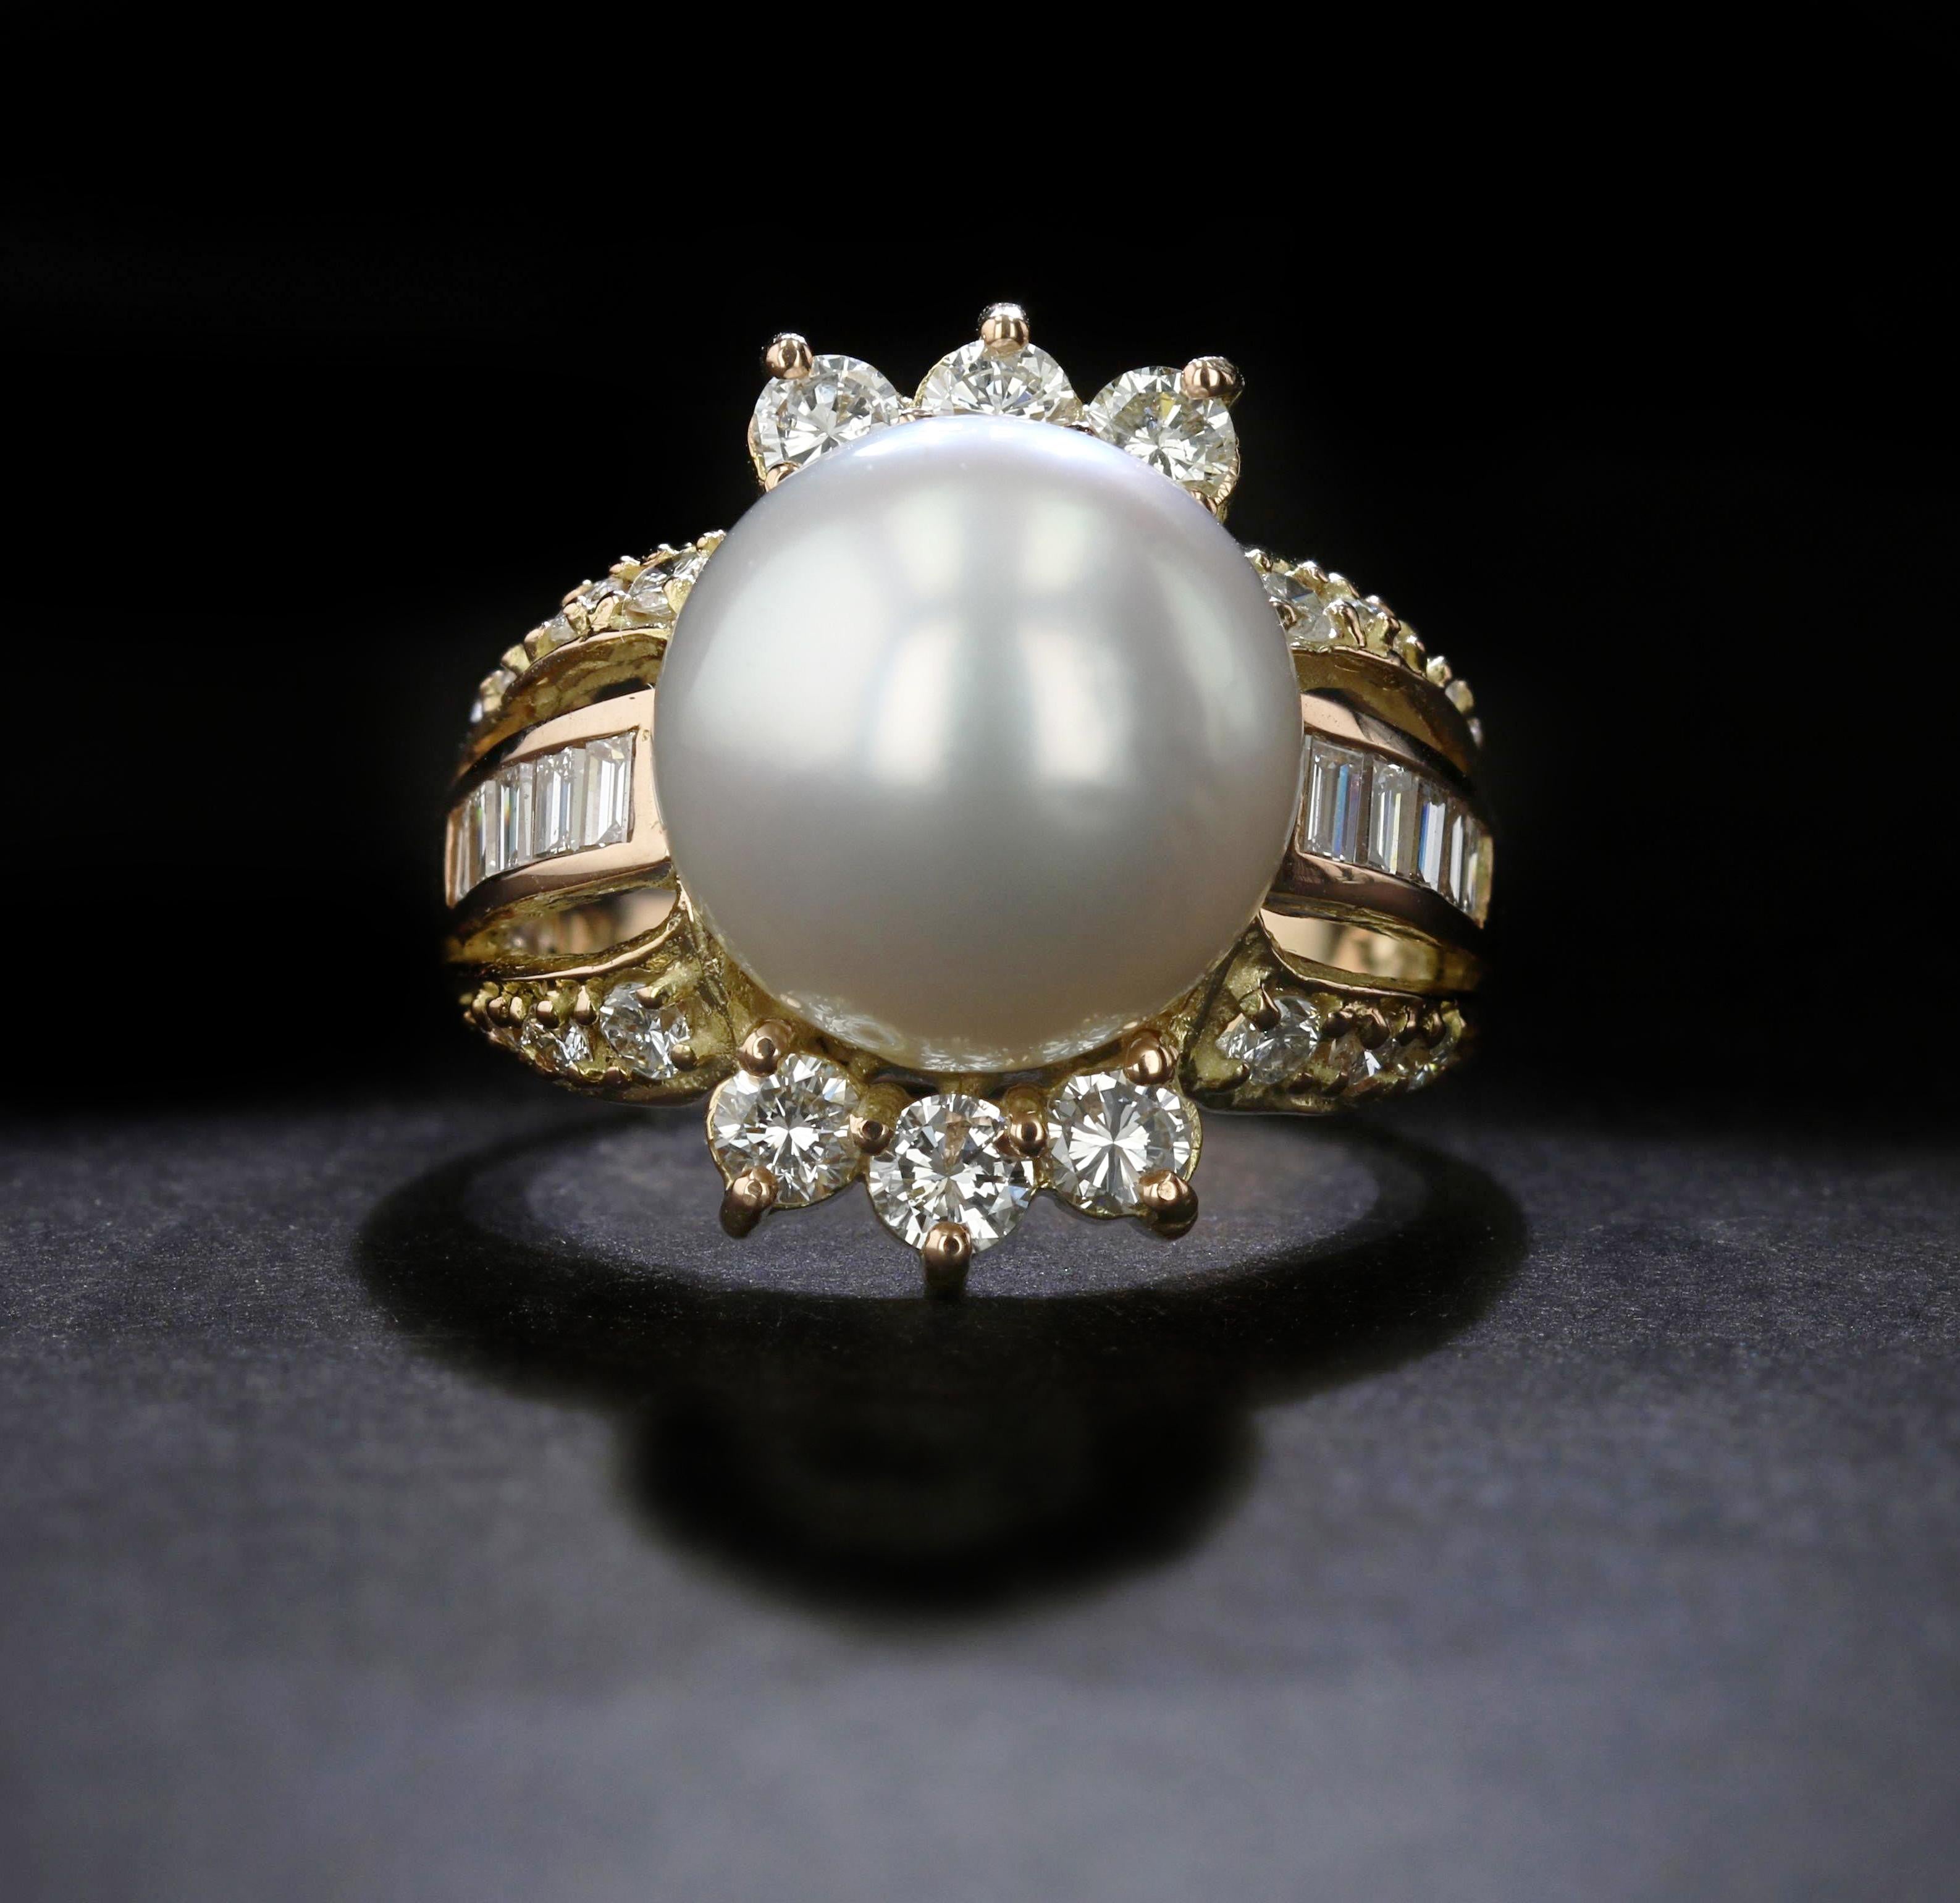 This estate ring is centered by a round, white South Sea pearl of approximately 12.50 millimeters. The ring is crafted in 14k yellow and rose gold and features a geometric split shank set with round and baguette diamonds. A trio of round diamonds